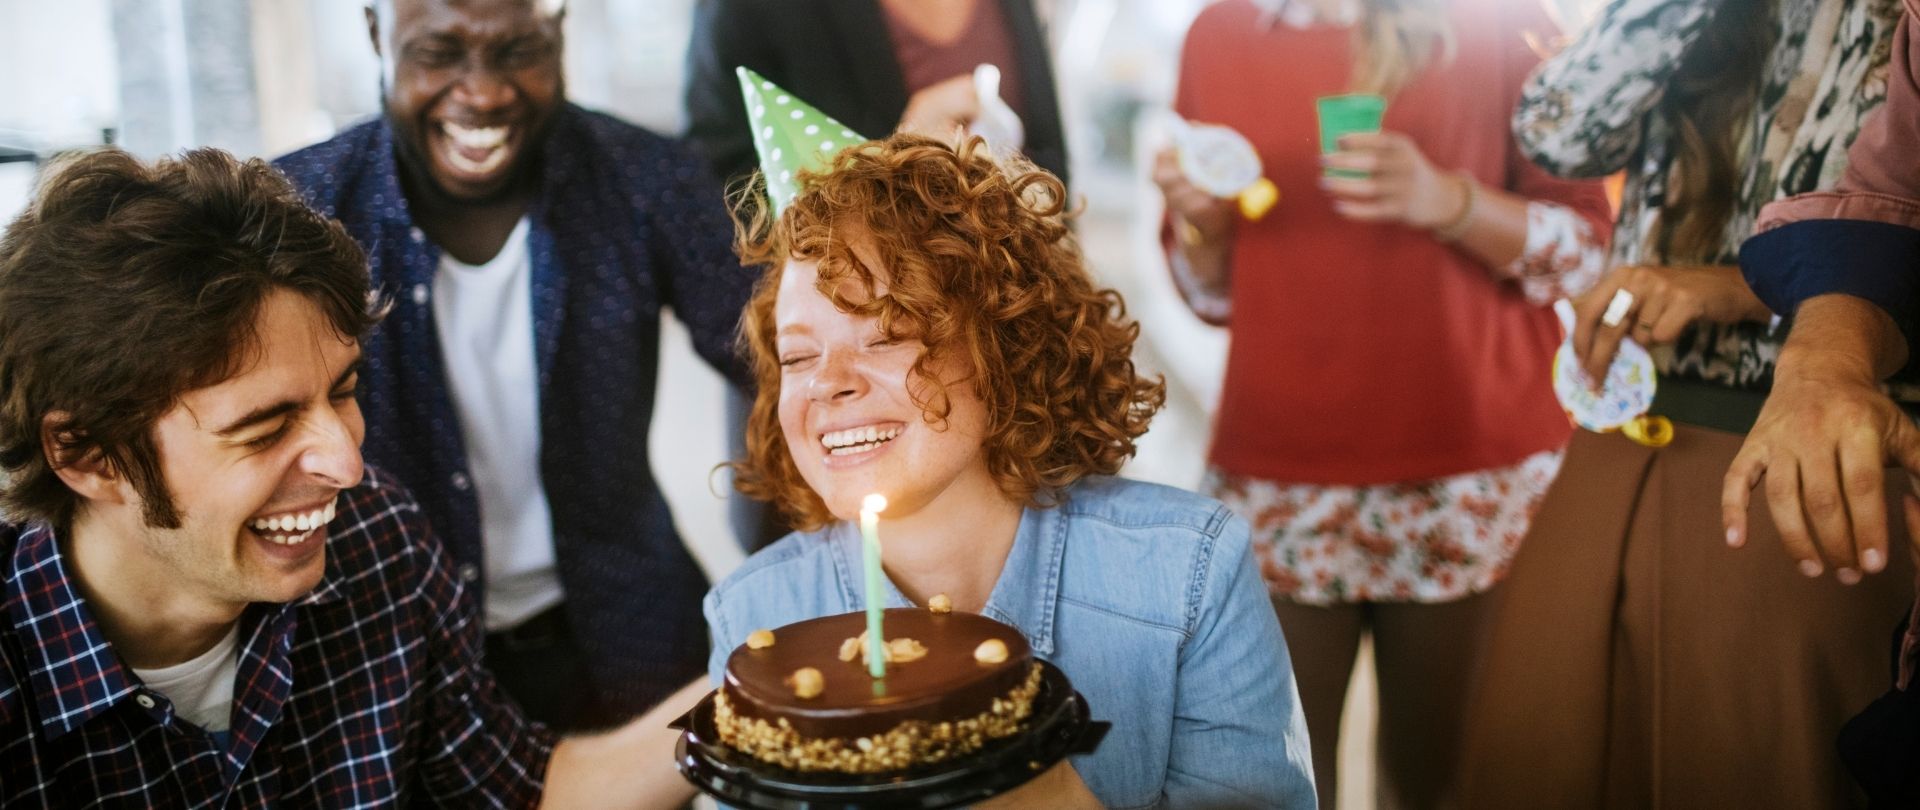 young lady with a birthday cake and candle surrounded by friends